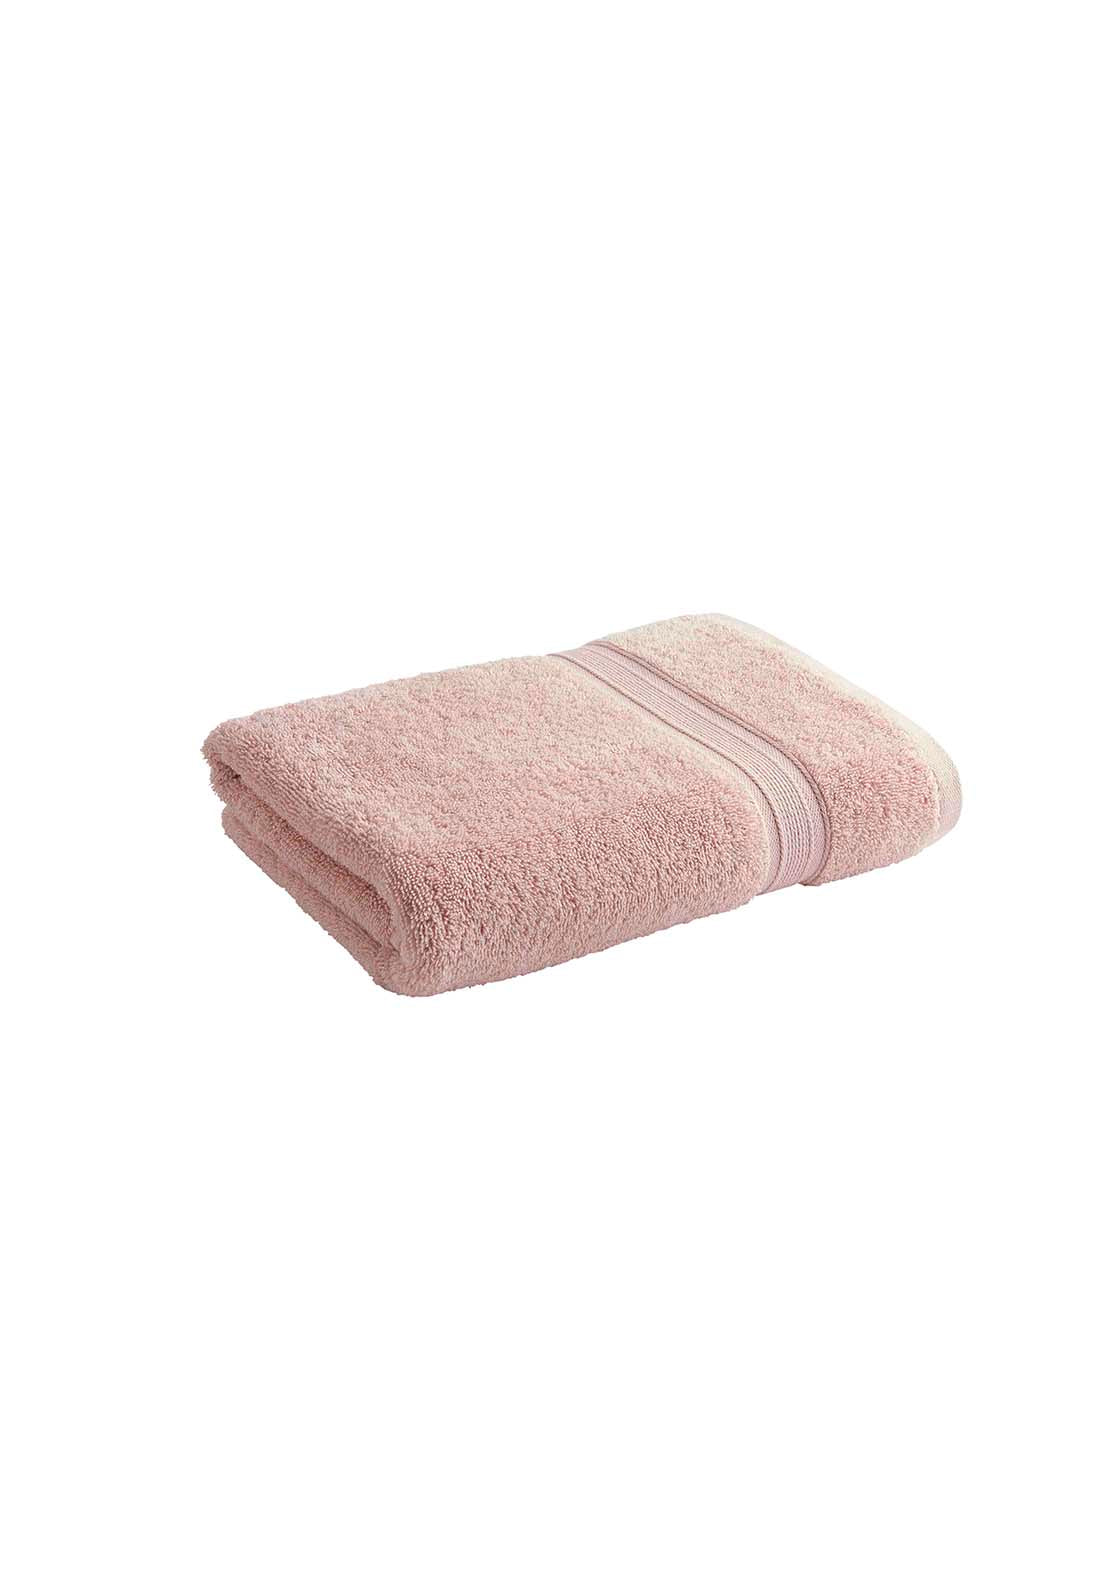 Christy Serene Hand Towel - Dusty Pink 1 Shaws Department Stores